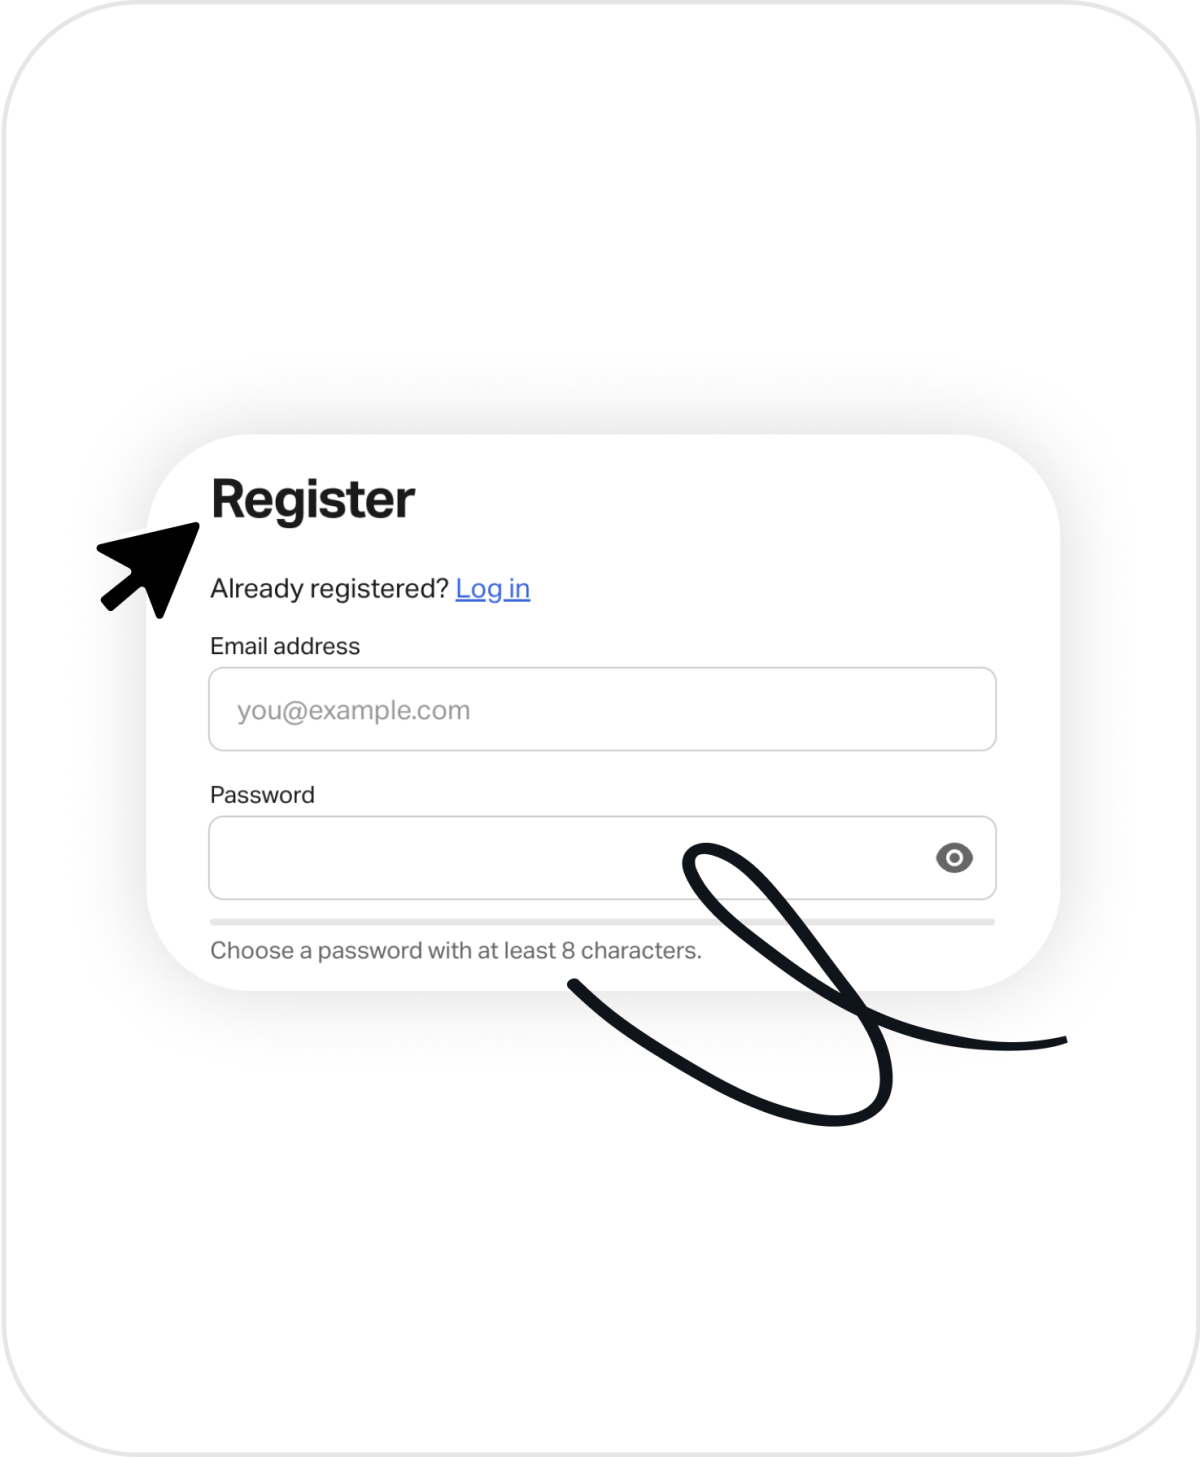 Image of the SumUp Signup screen